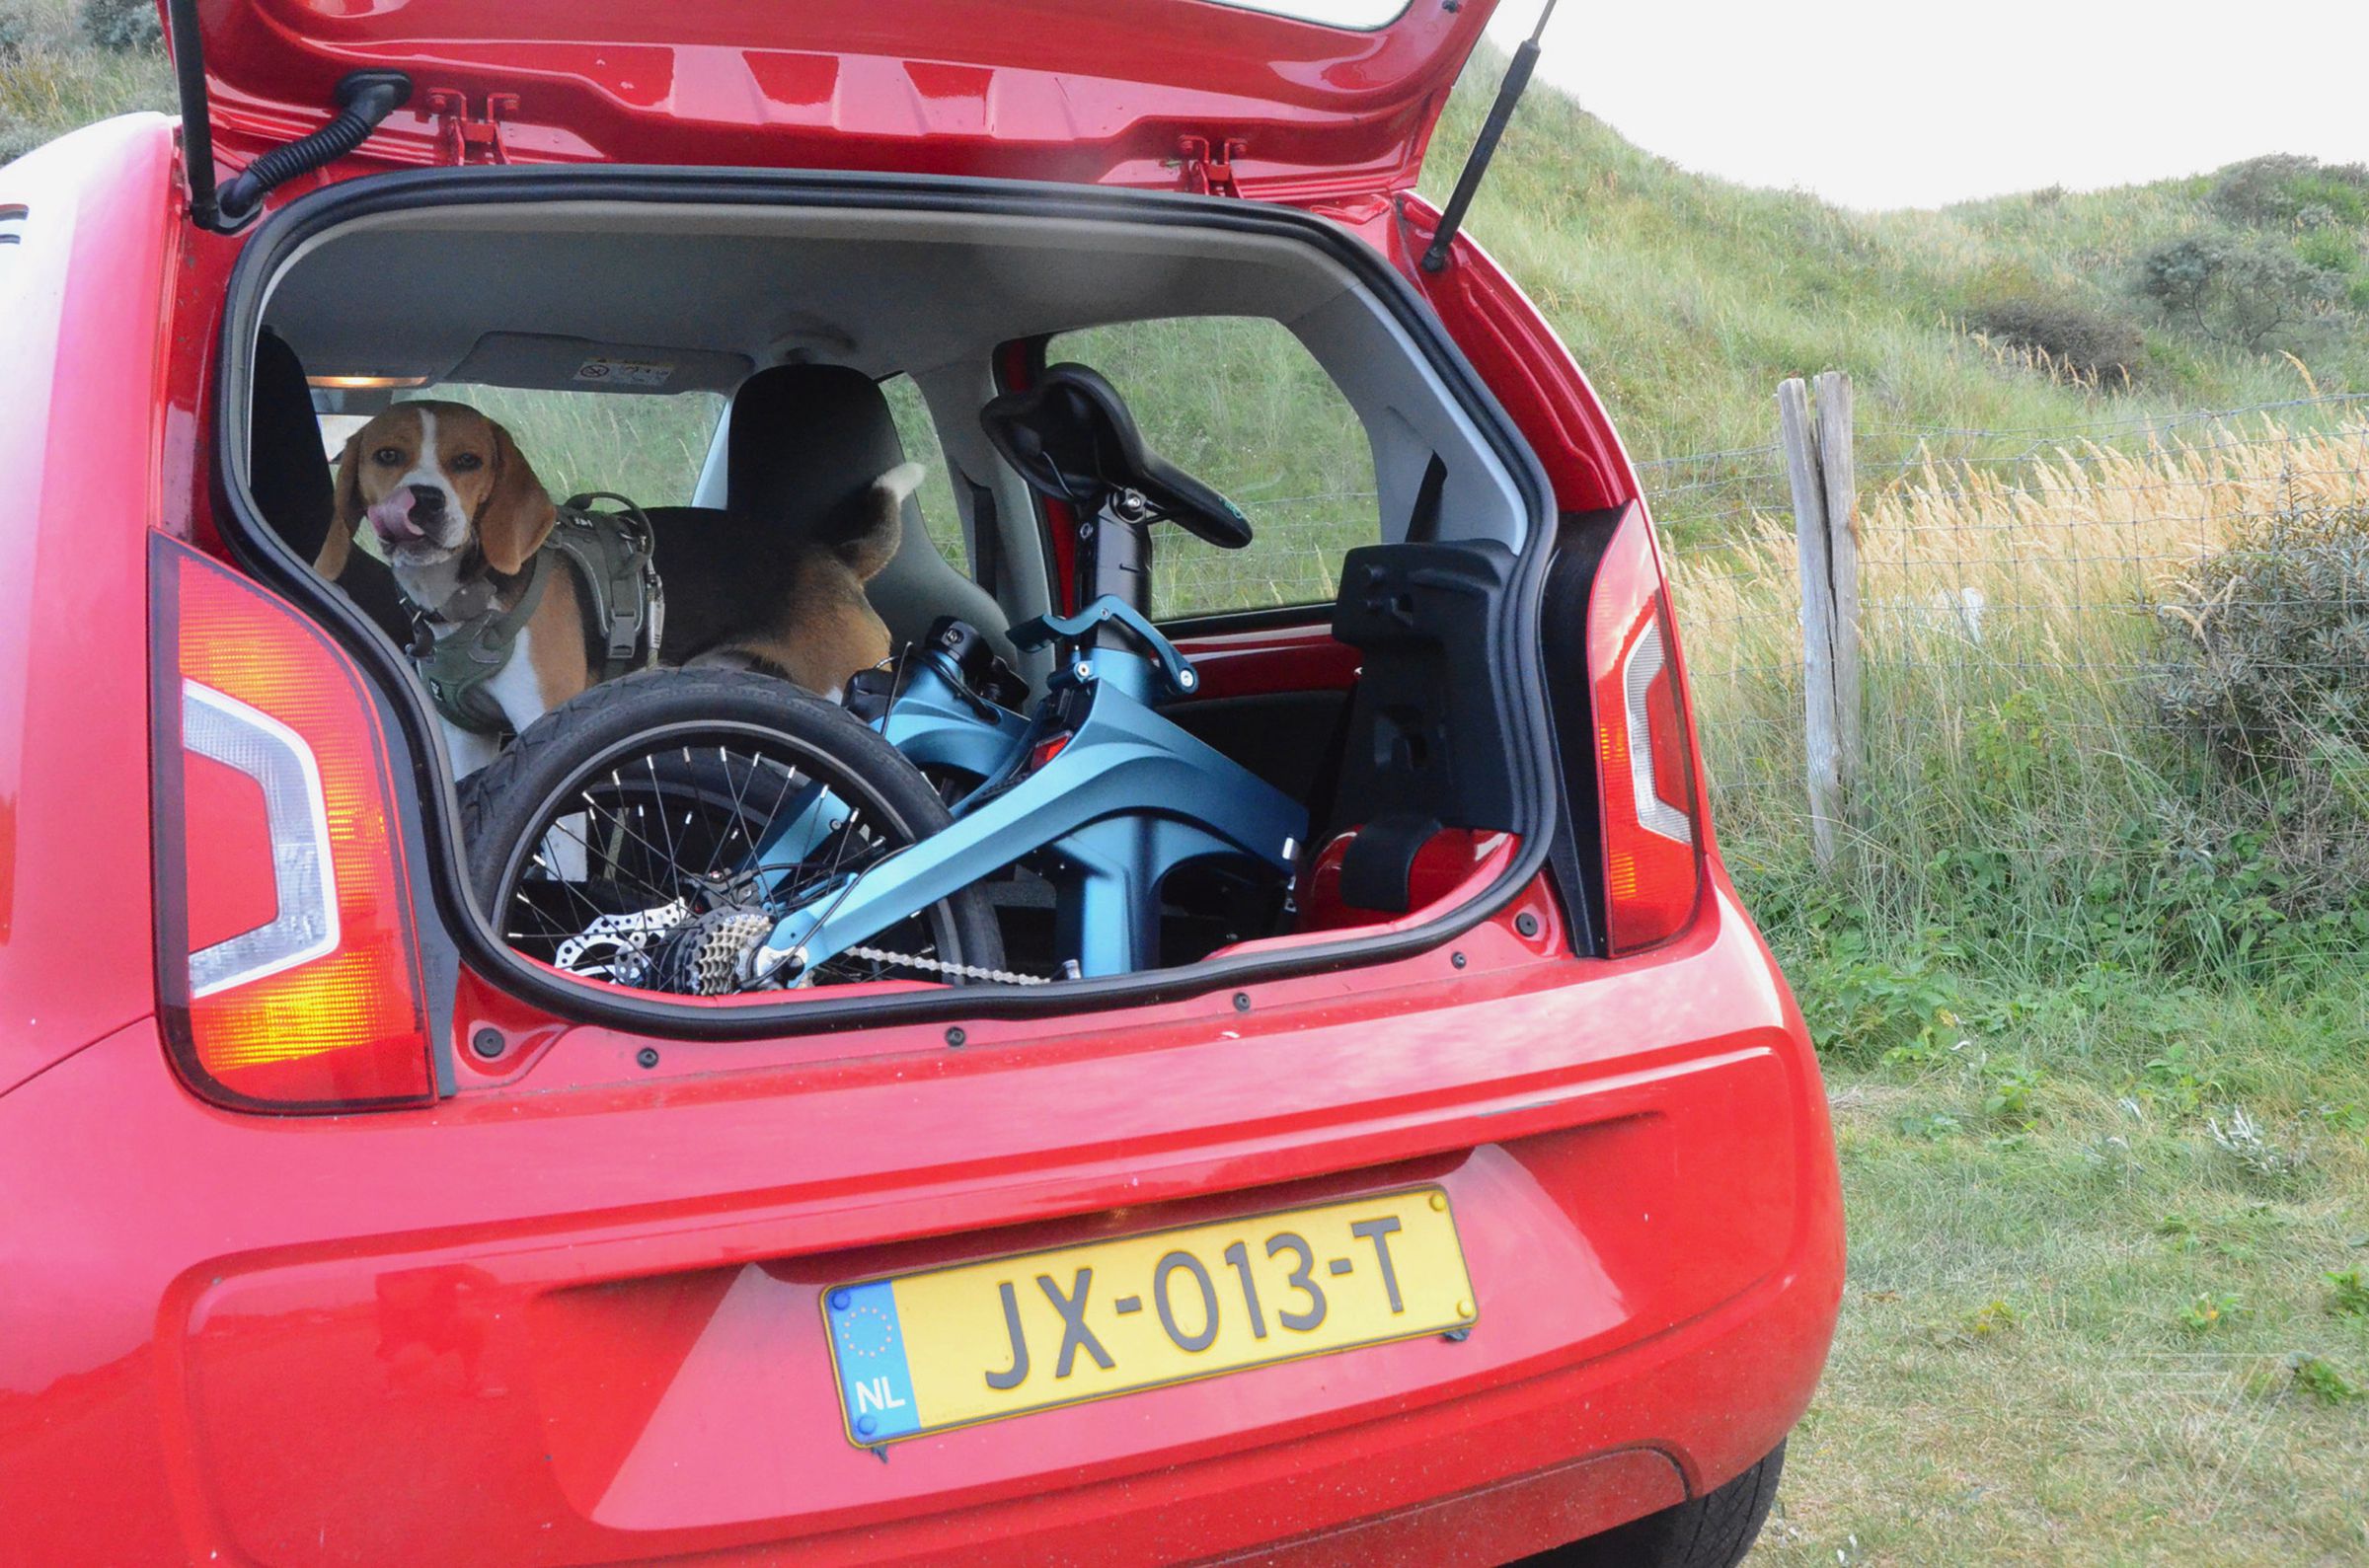 The Fiido X easily fits inside one of VW’s smallest cars.